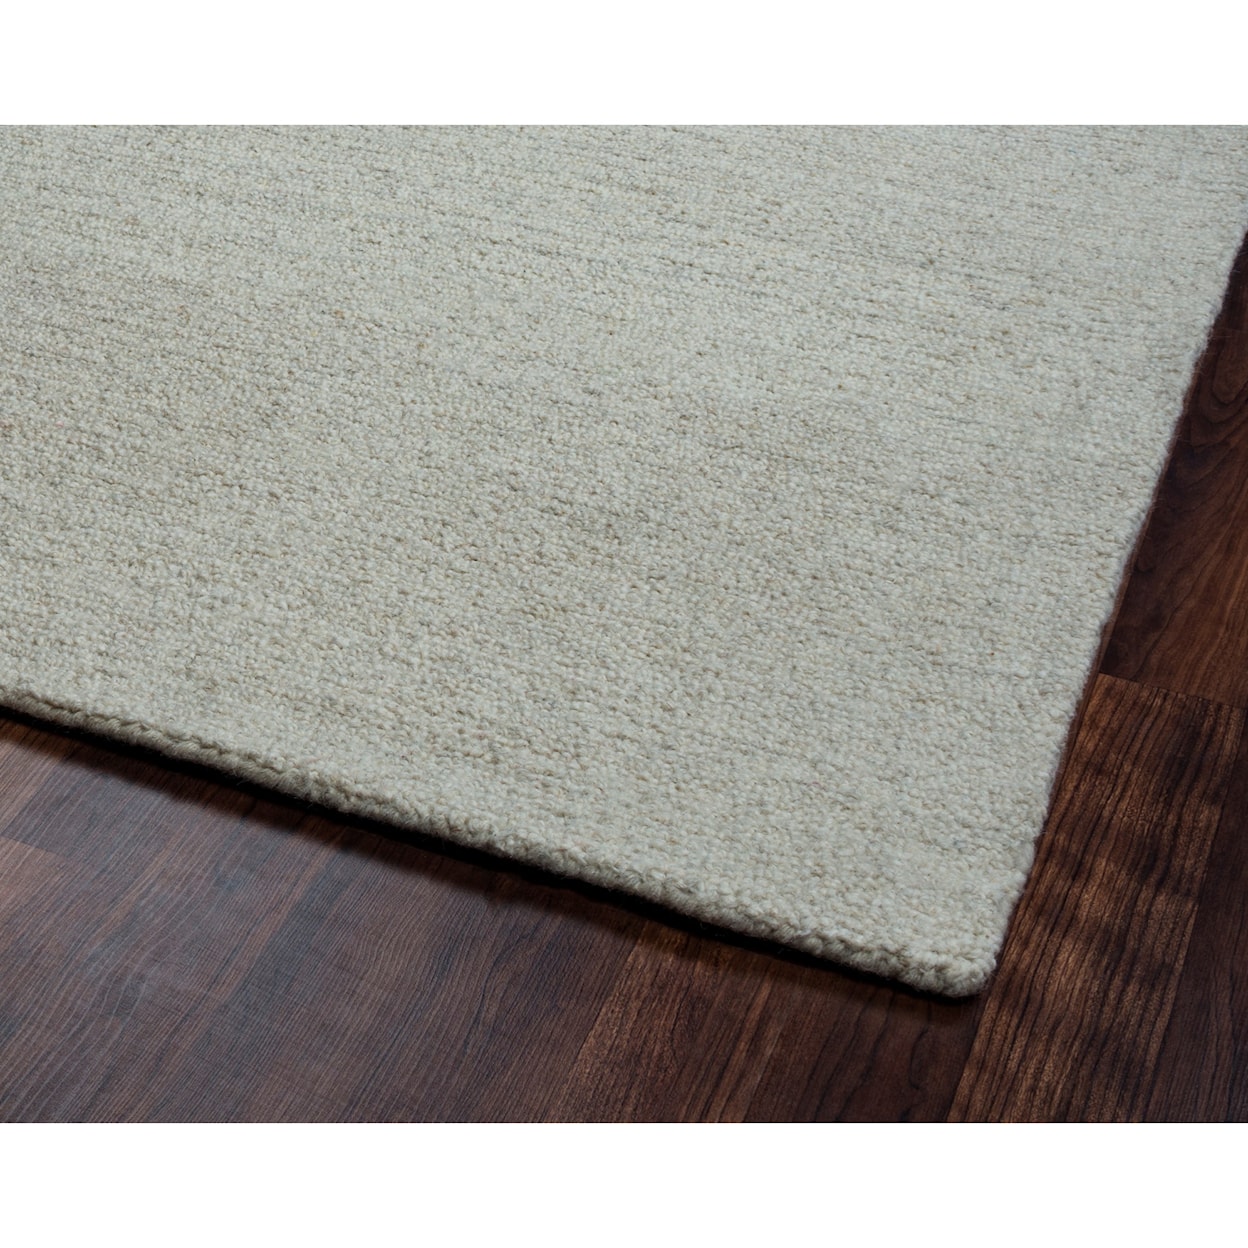 Rizzy Home Country 3' x 5' Rectangle Rug